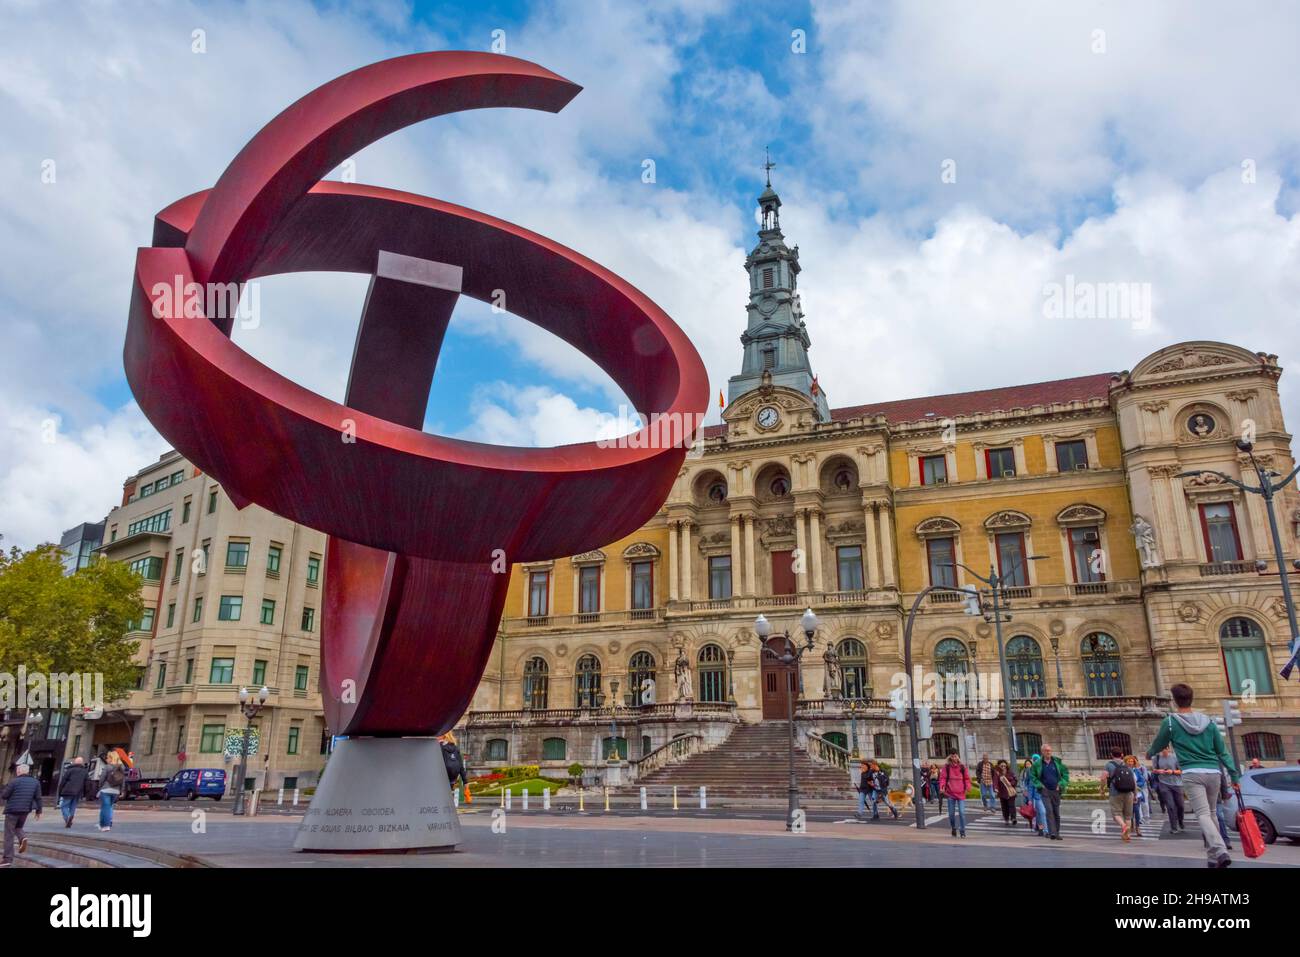 The Alternative Ovoid, sculpture by Jorge Oteiza, in front of City Hall, Bilbao, Biscay Province, Basque County Autonomous Community, Spain Stock Photo